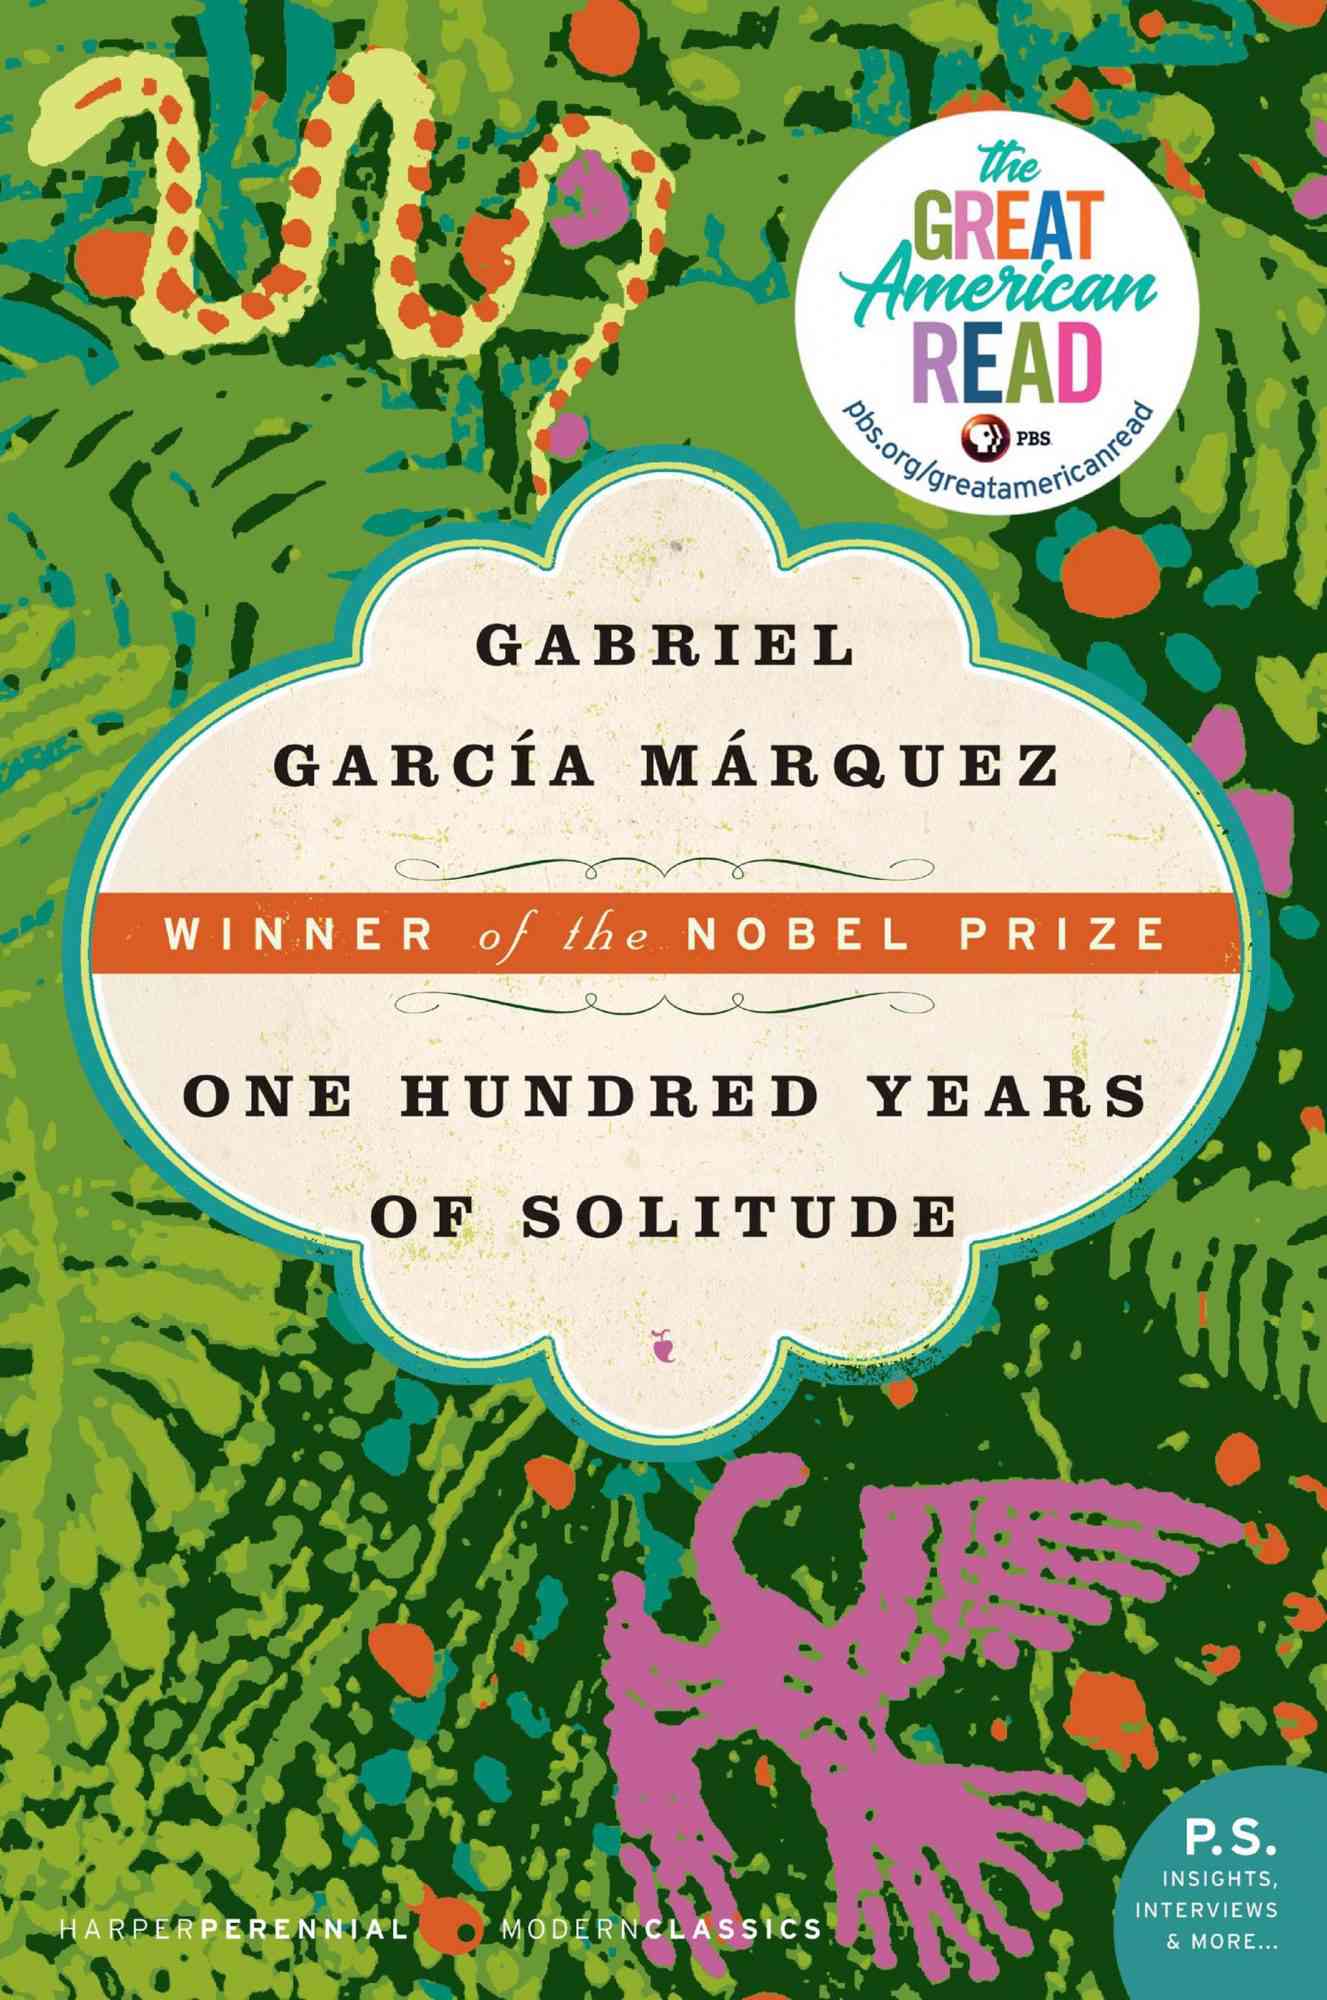 One Hundred Years of Solitude by Gabriel García Márquez (1967)